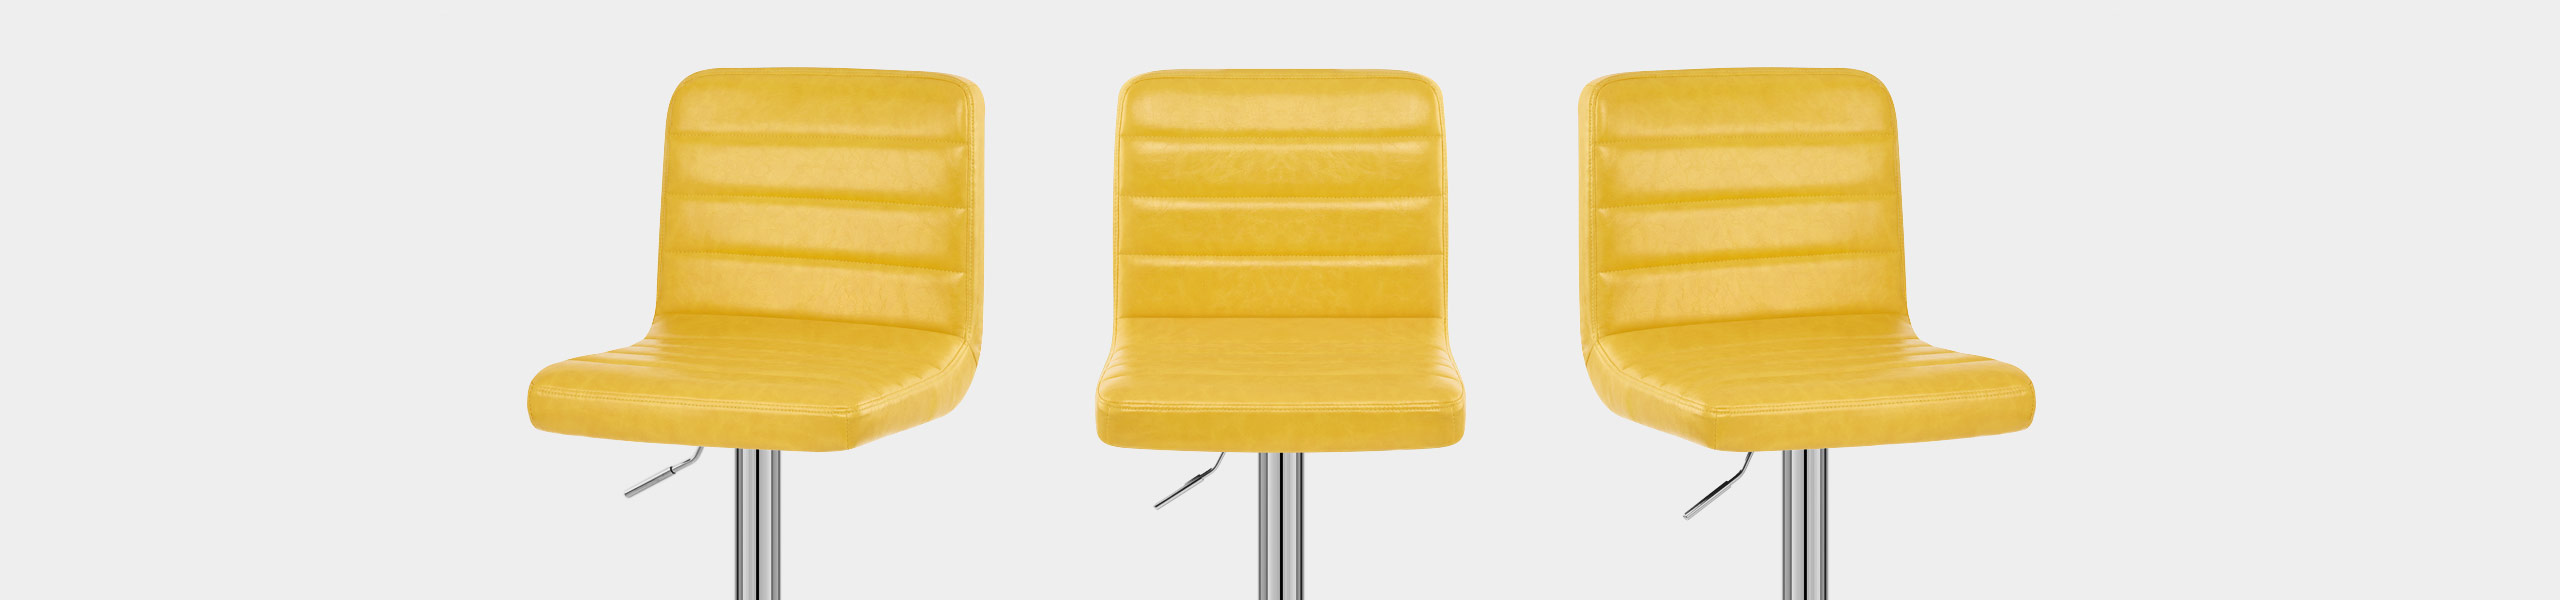 Prime Bar Stool Antique Yellow Video Banner